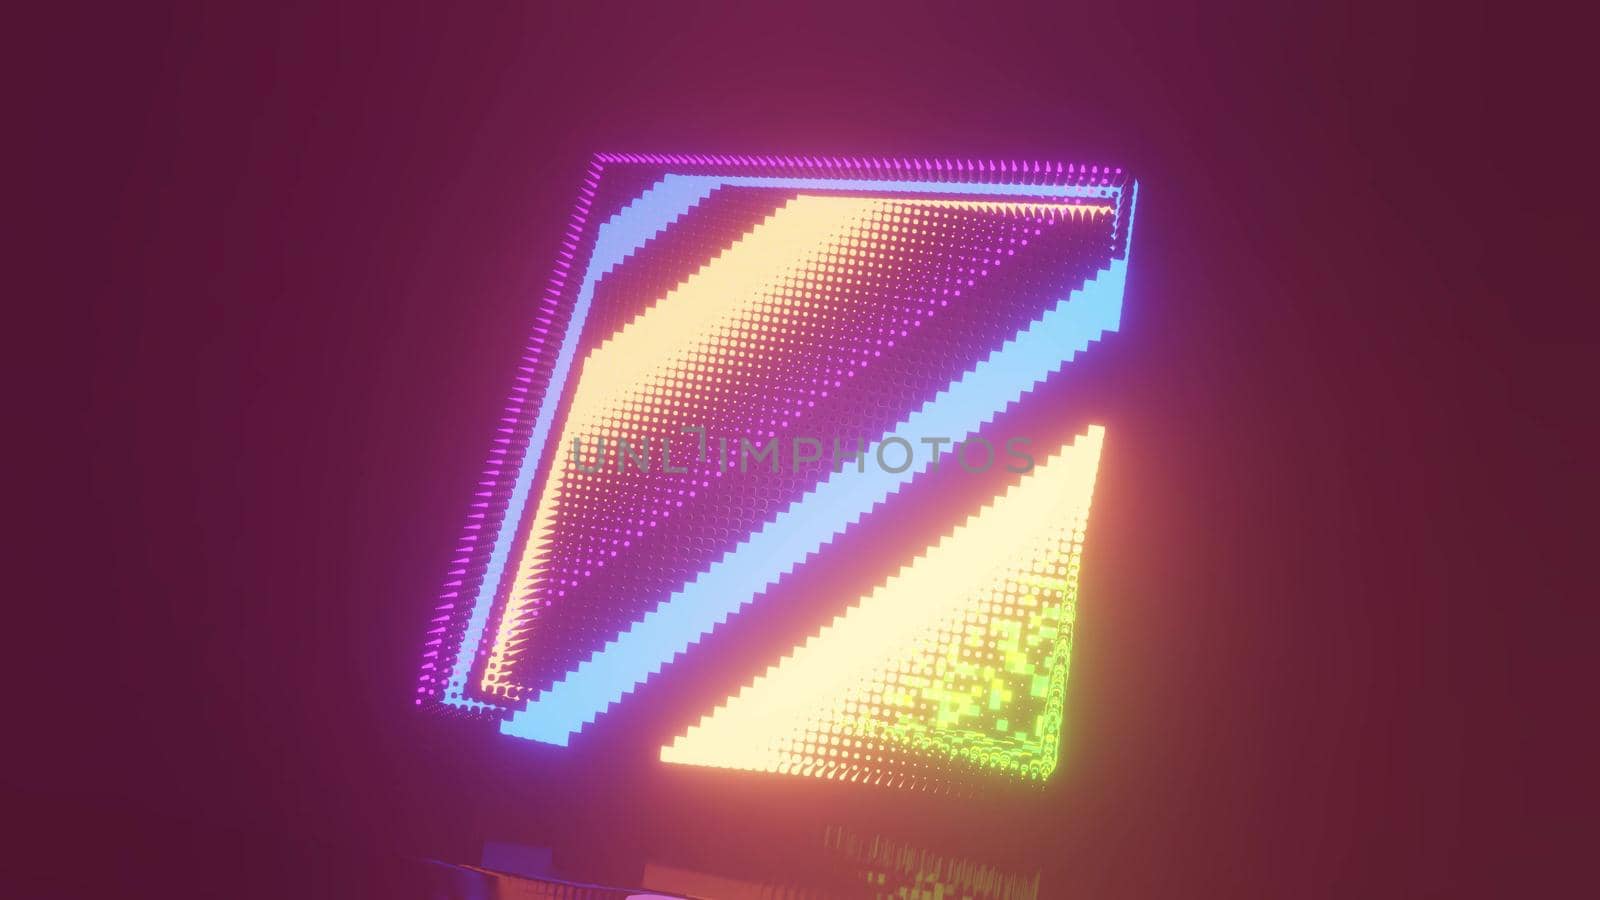 4K UHD 3D illustration of small pixels shining with colorful neon light and forming sci fi geometric ornament